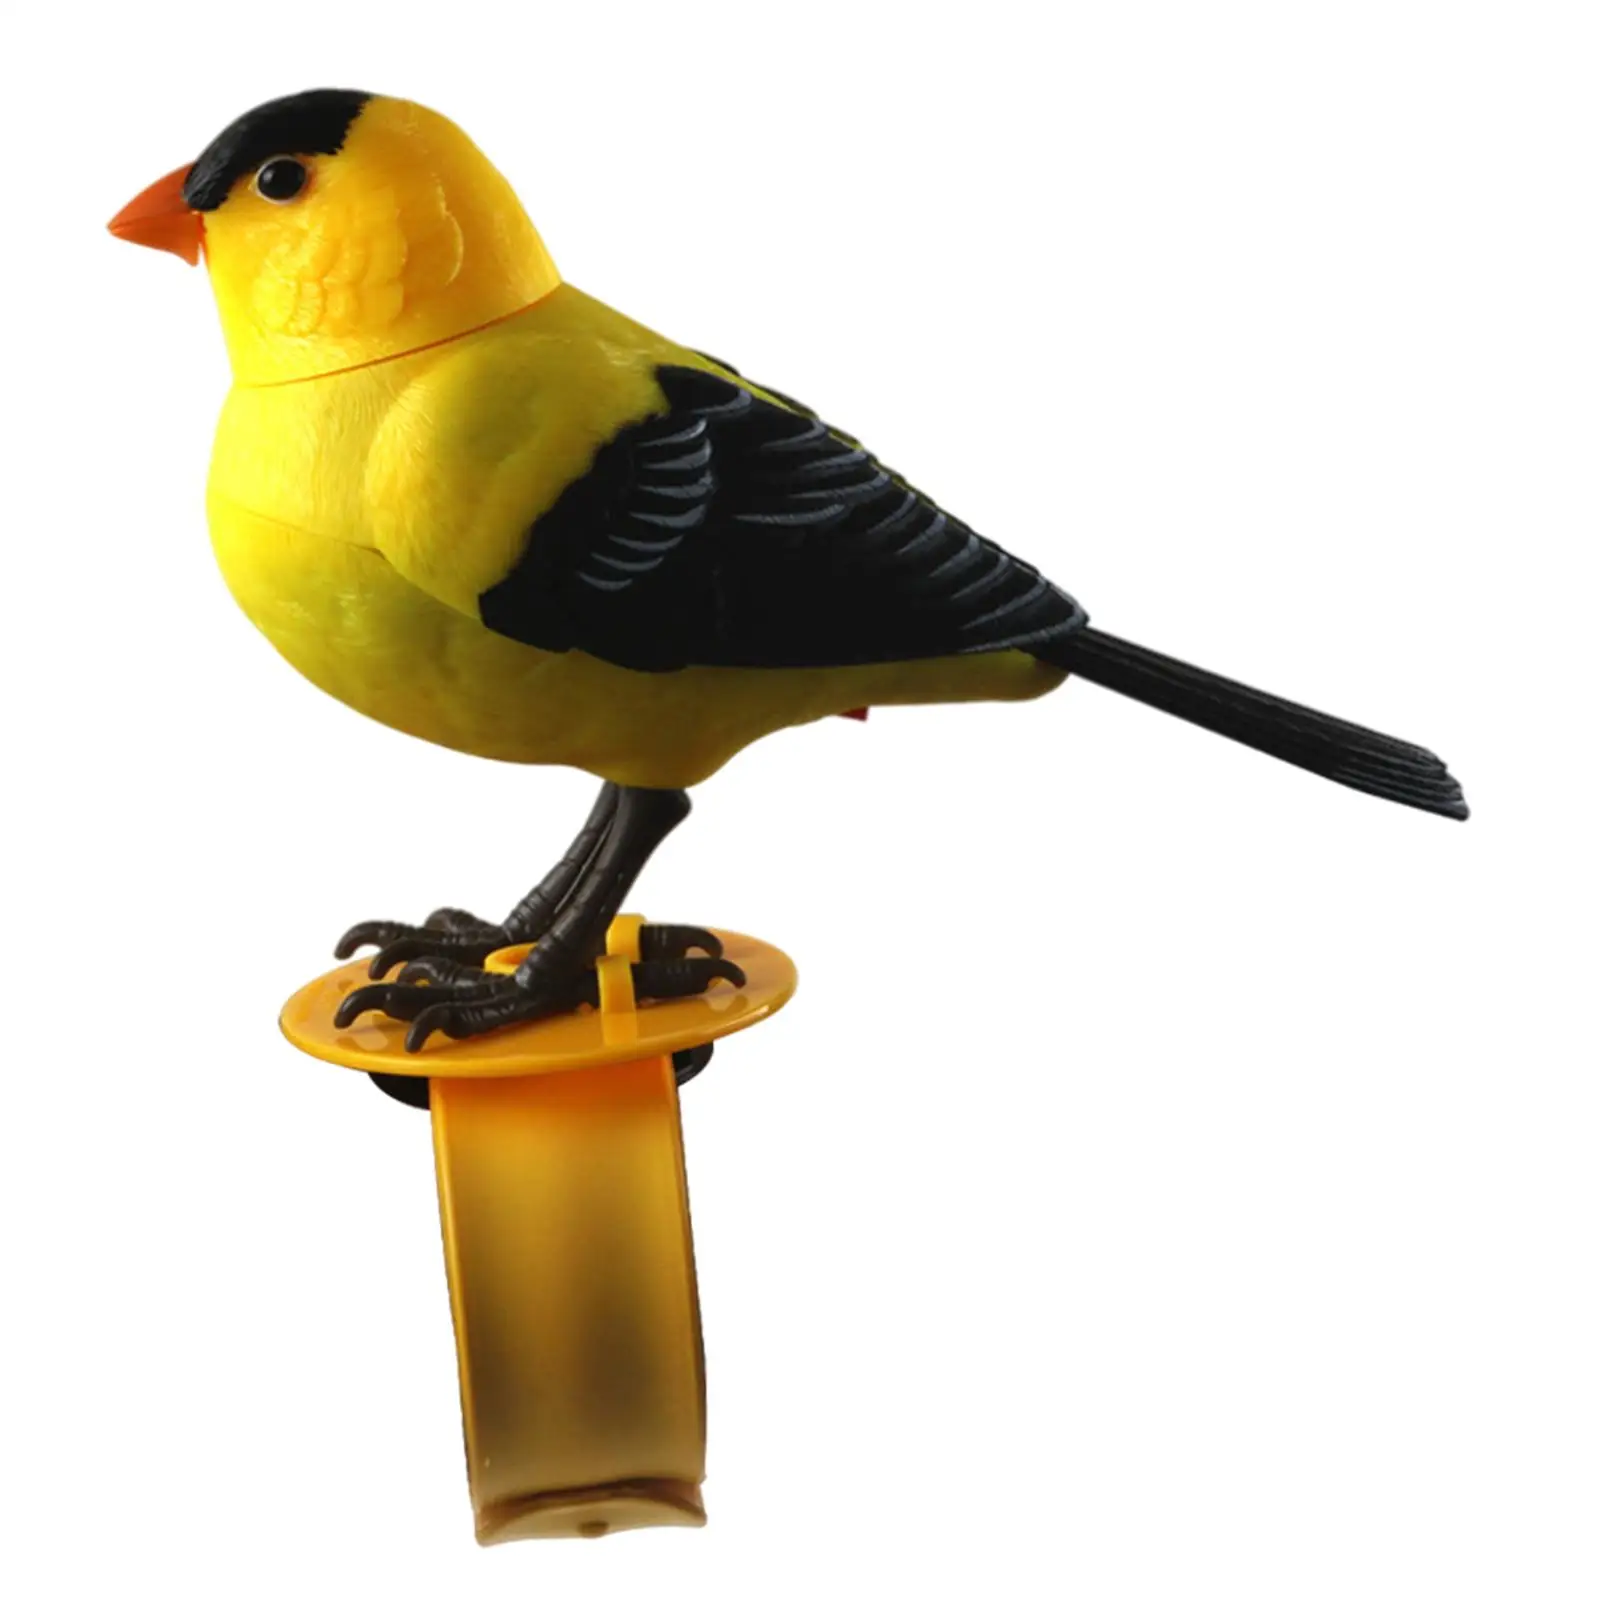 Voice Controlled Bird Pet Activate Playing Toy Kids Talking Parrot for Baby